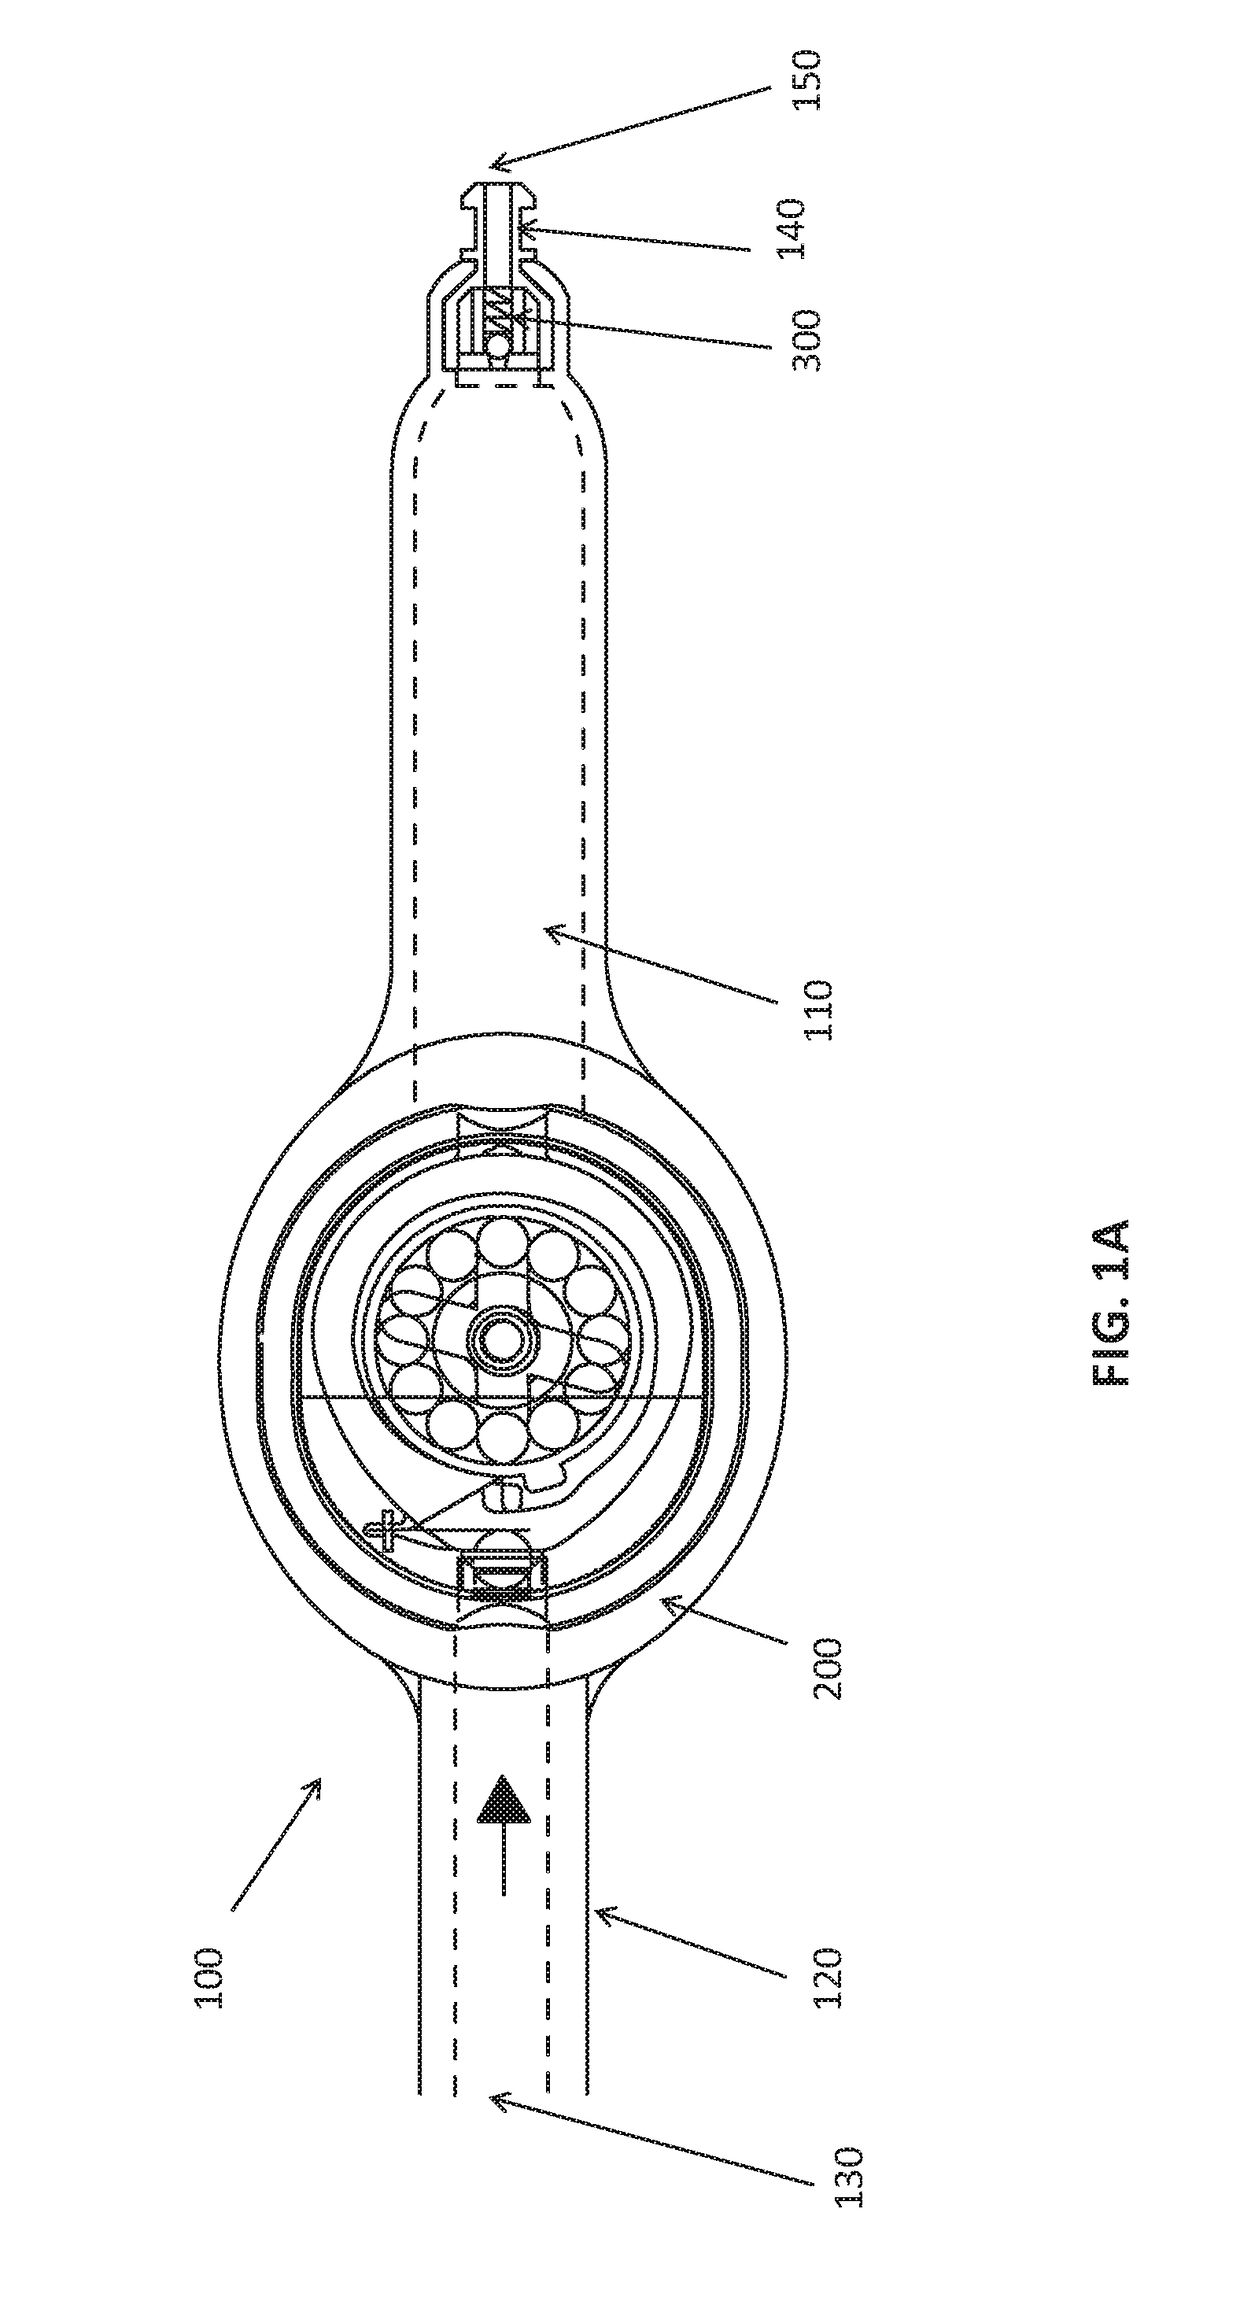 Externally programable magnetic valve assembly and controller